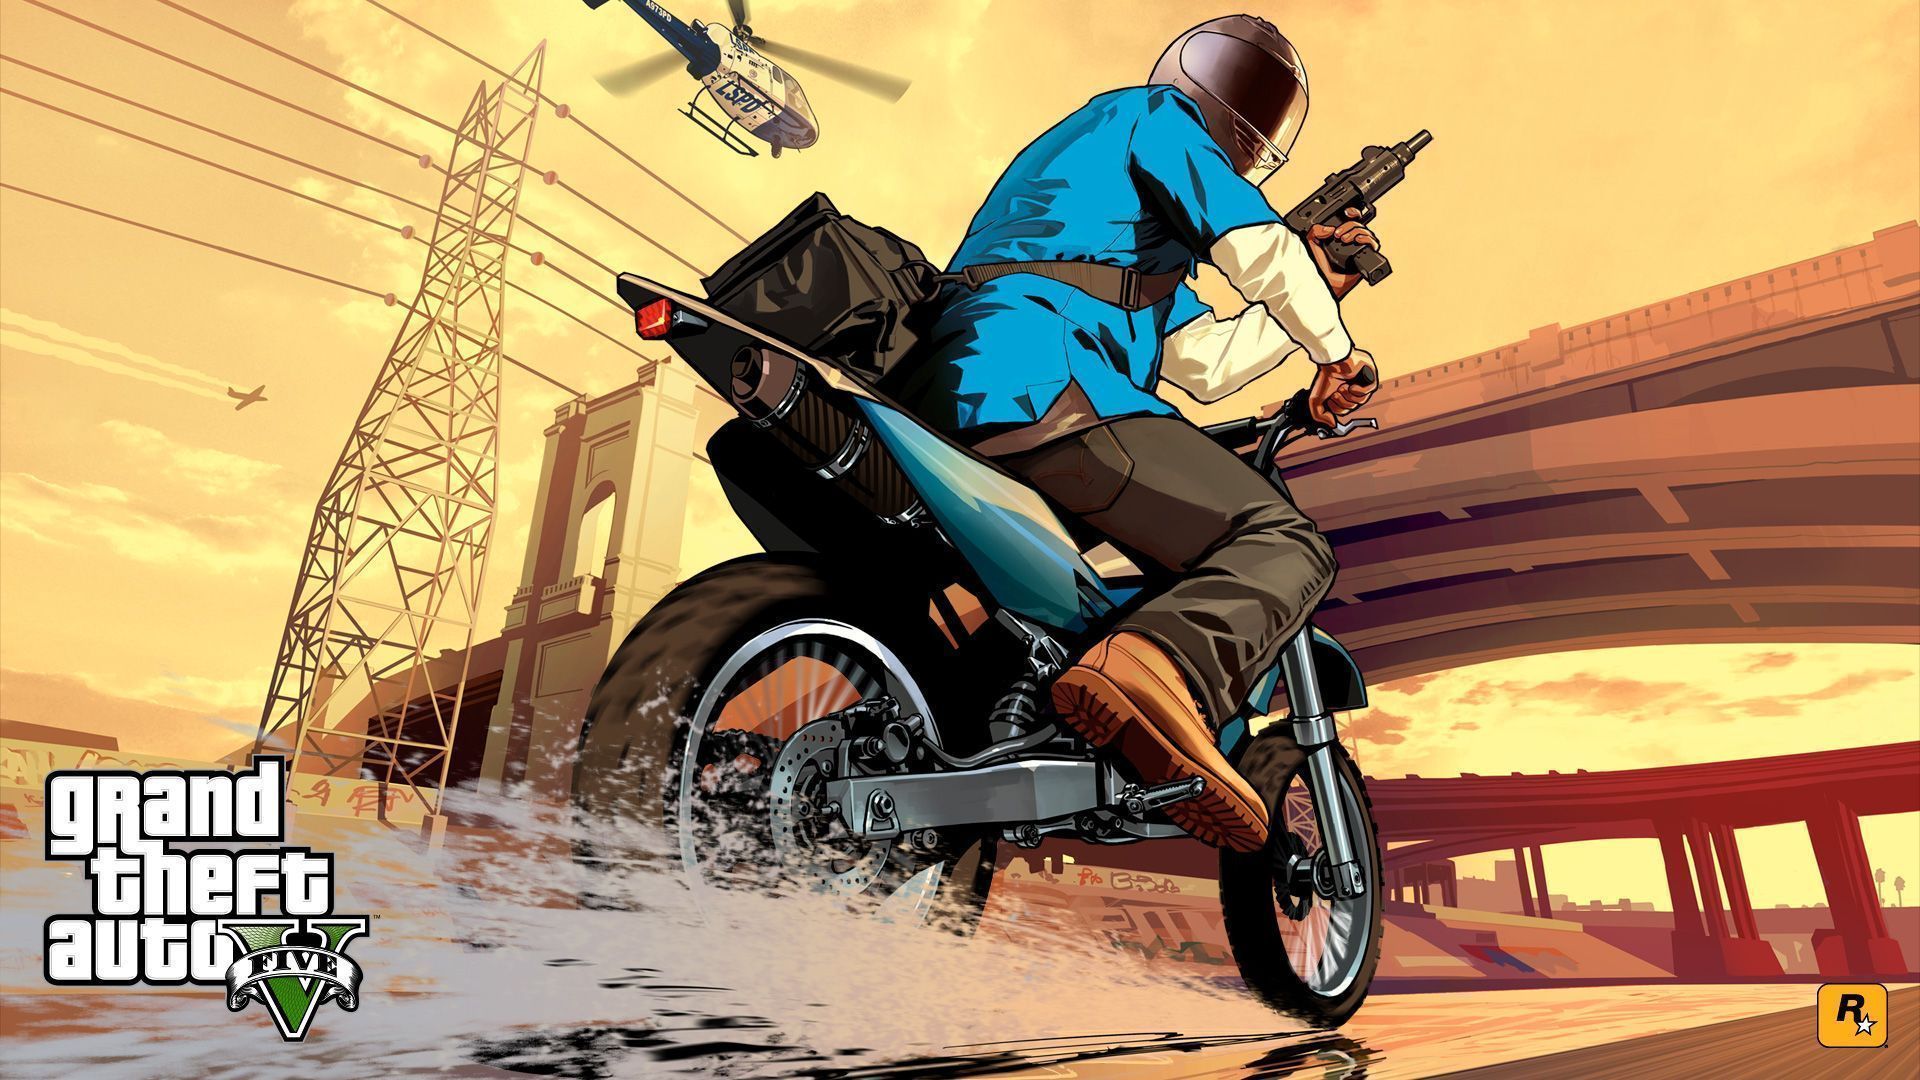 Rockstar Doubles Down on New GTA 5 Wallpapers